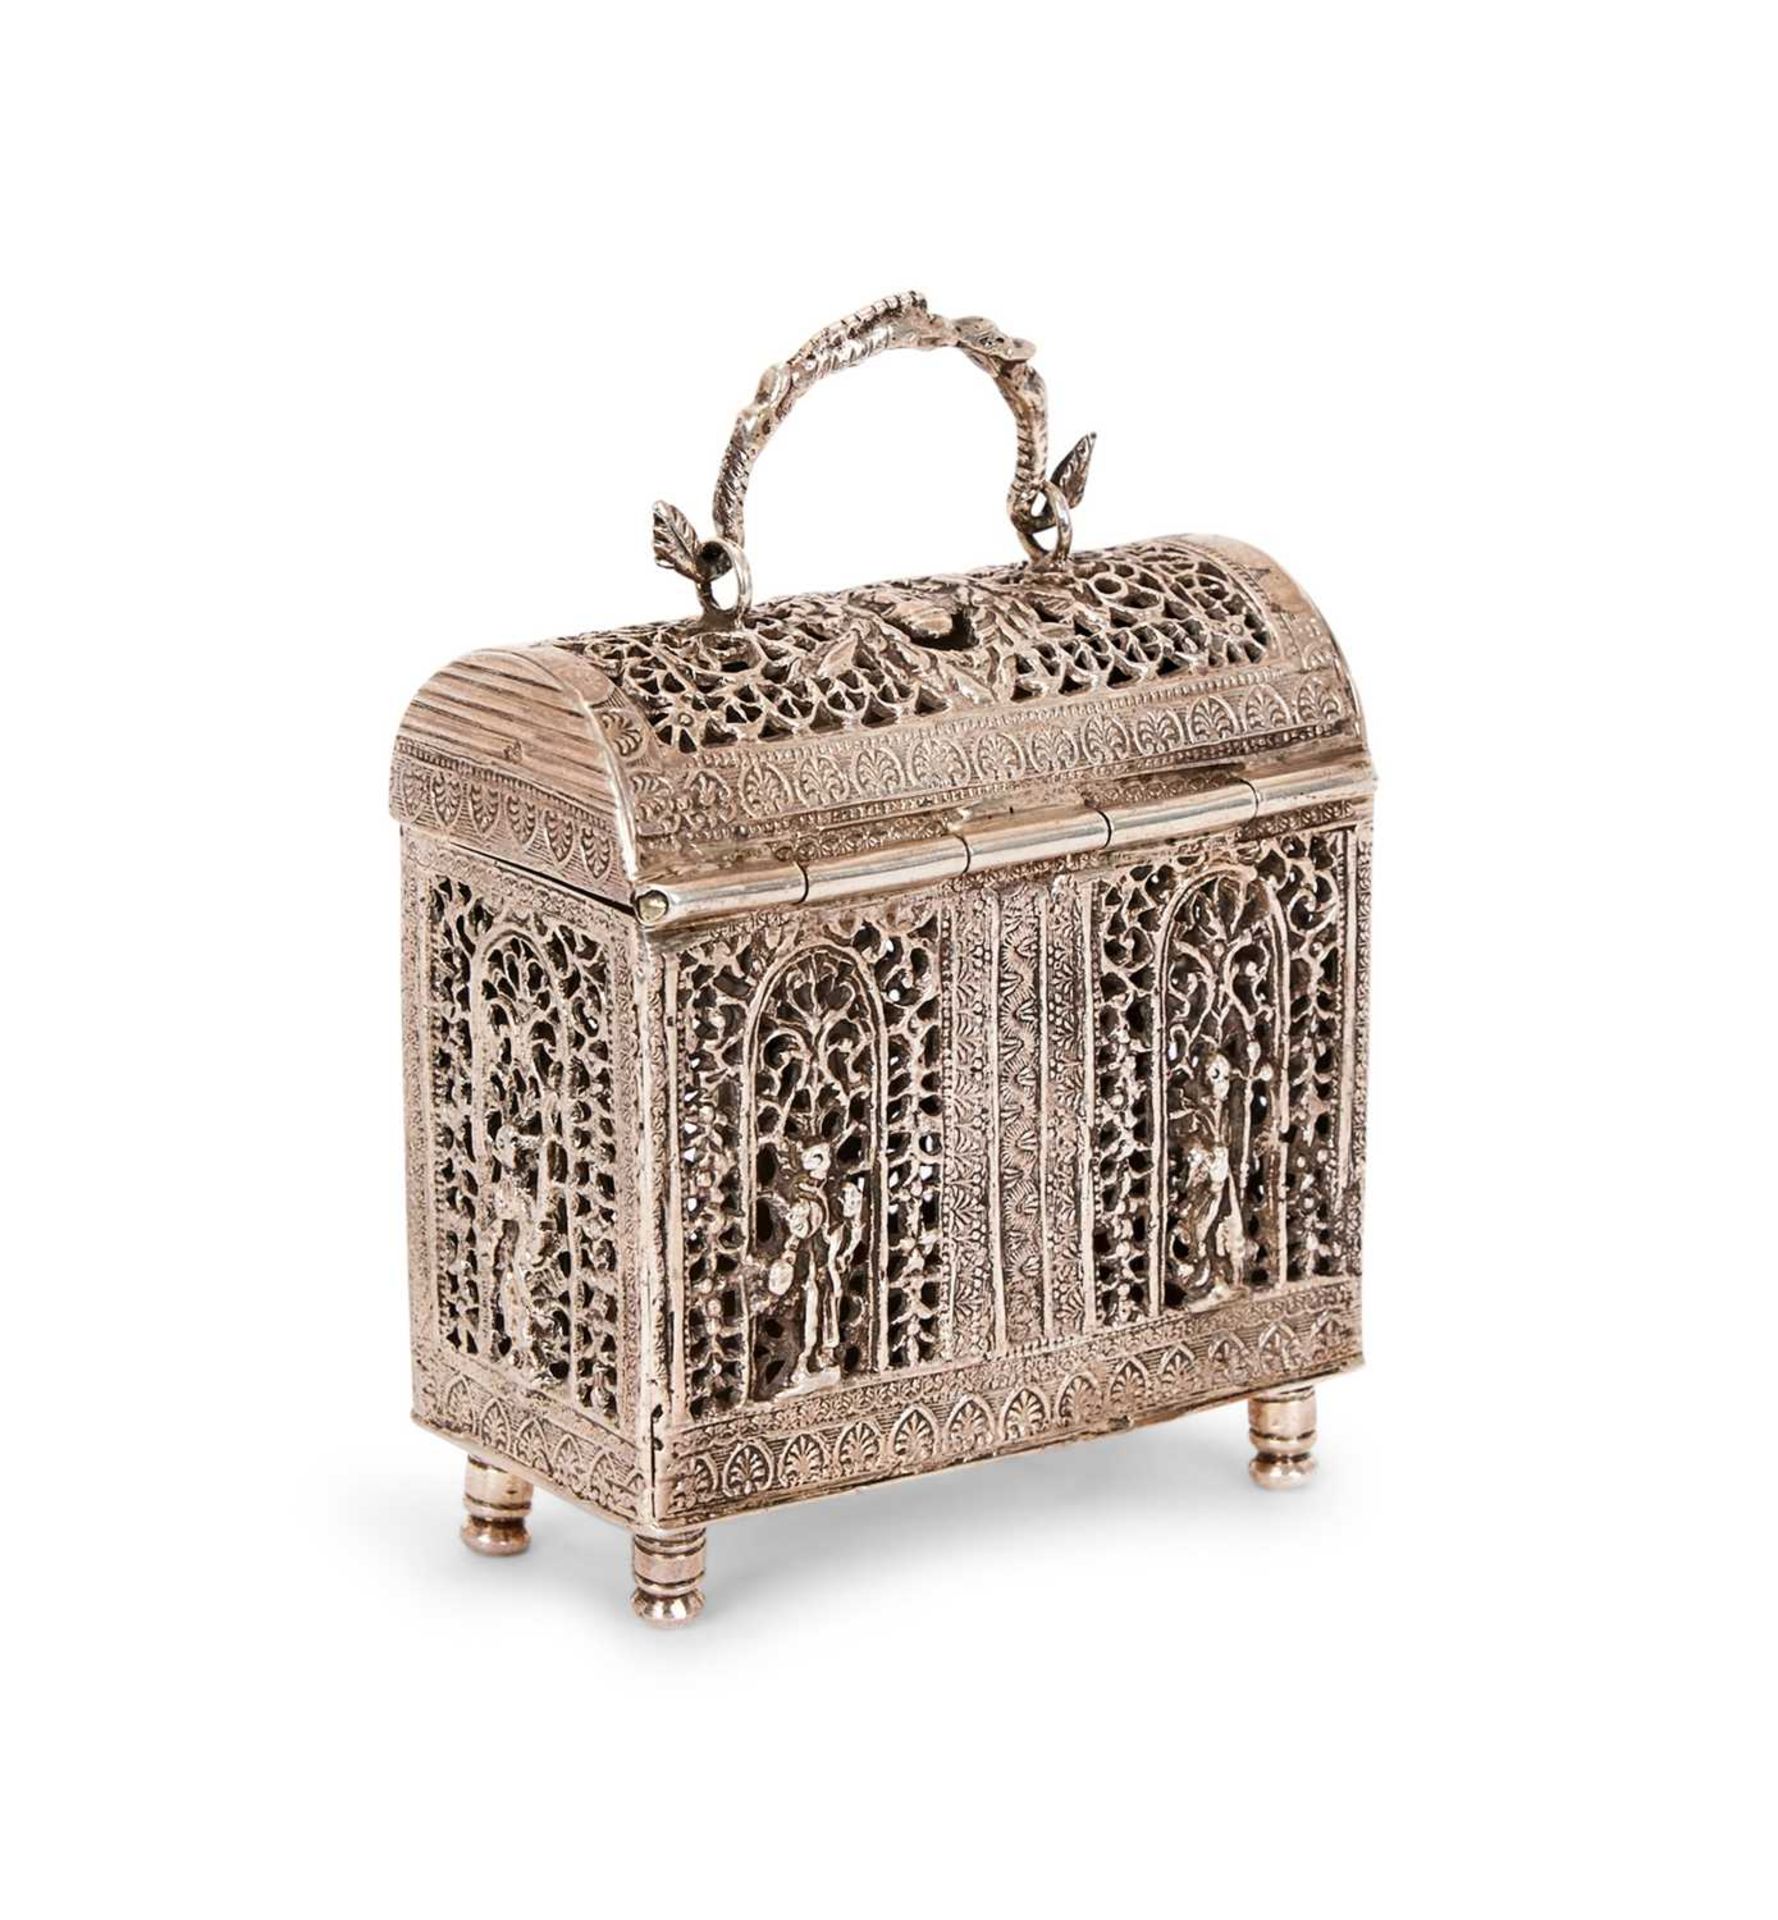 A LATE 19TH CENTURY DUTCH SILVER MINIATURE CASKET IN THE RENAISSANCE REVIVAL STYLE - Image 2 of 2